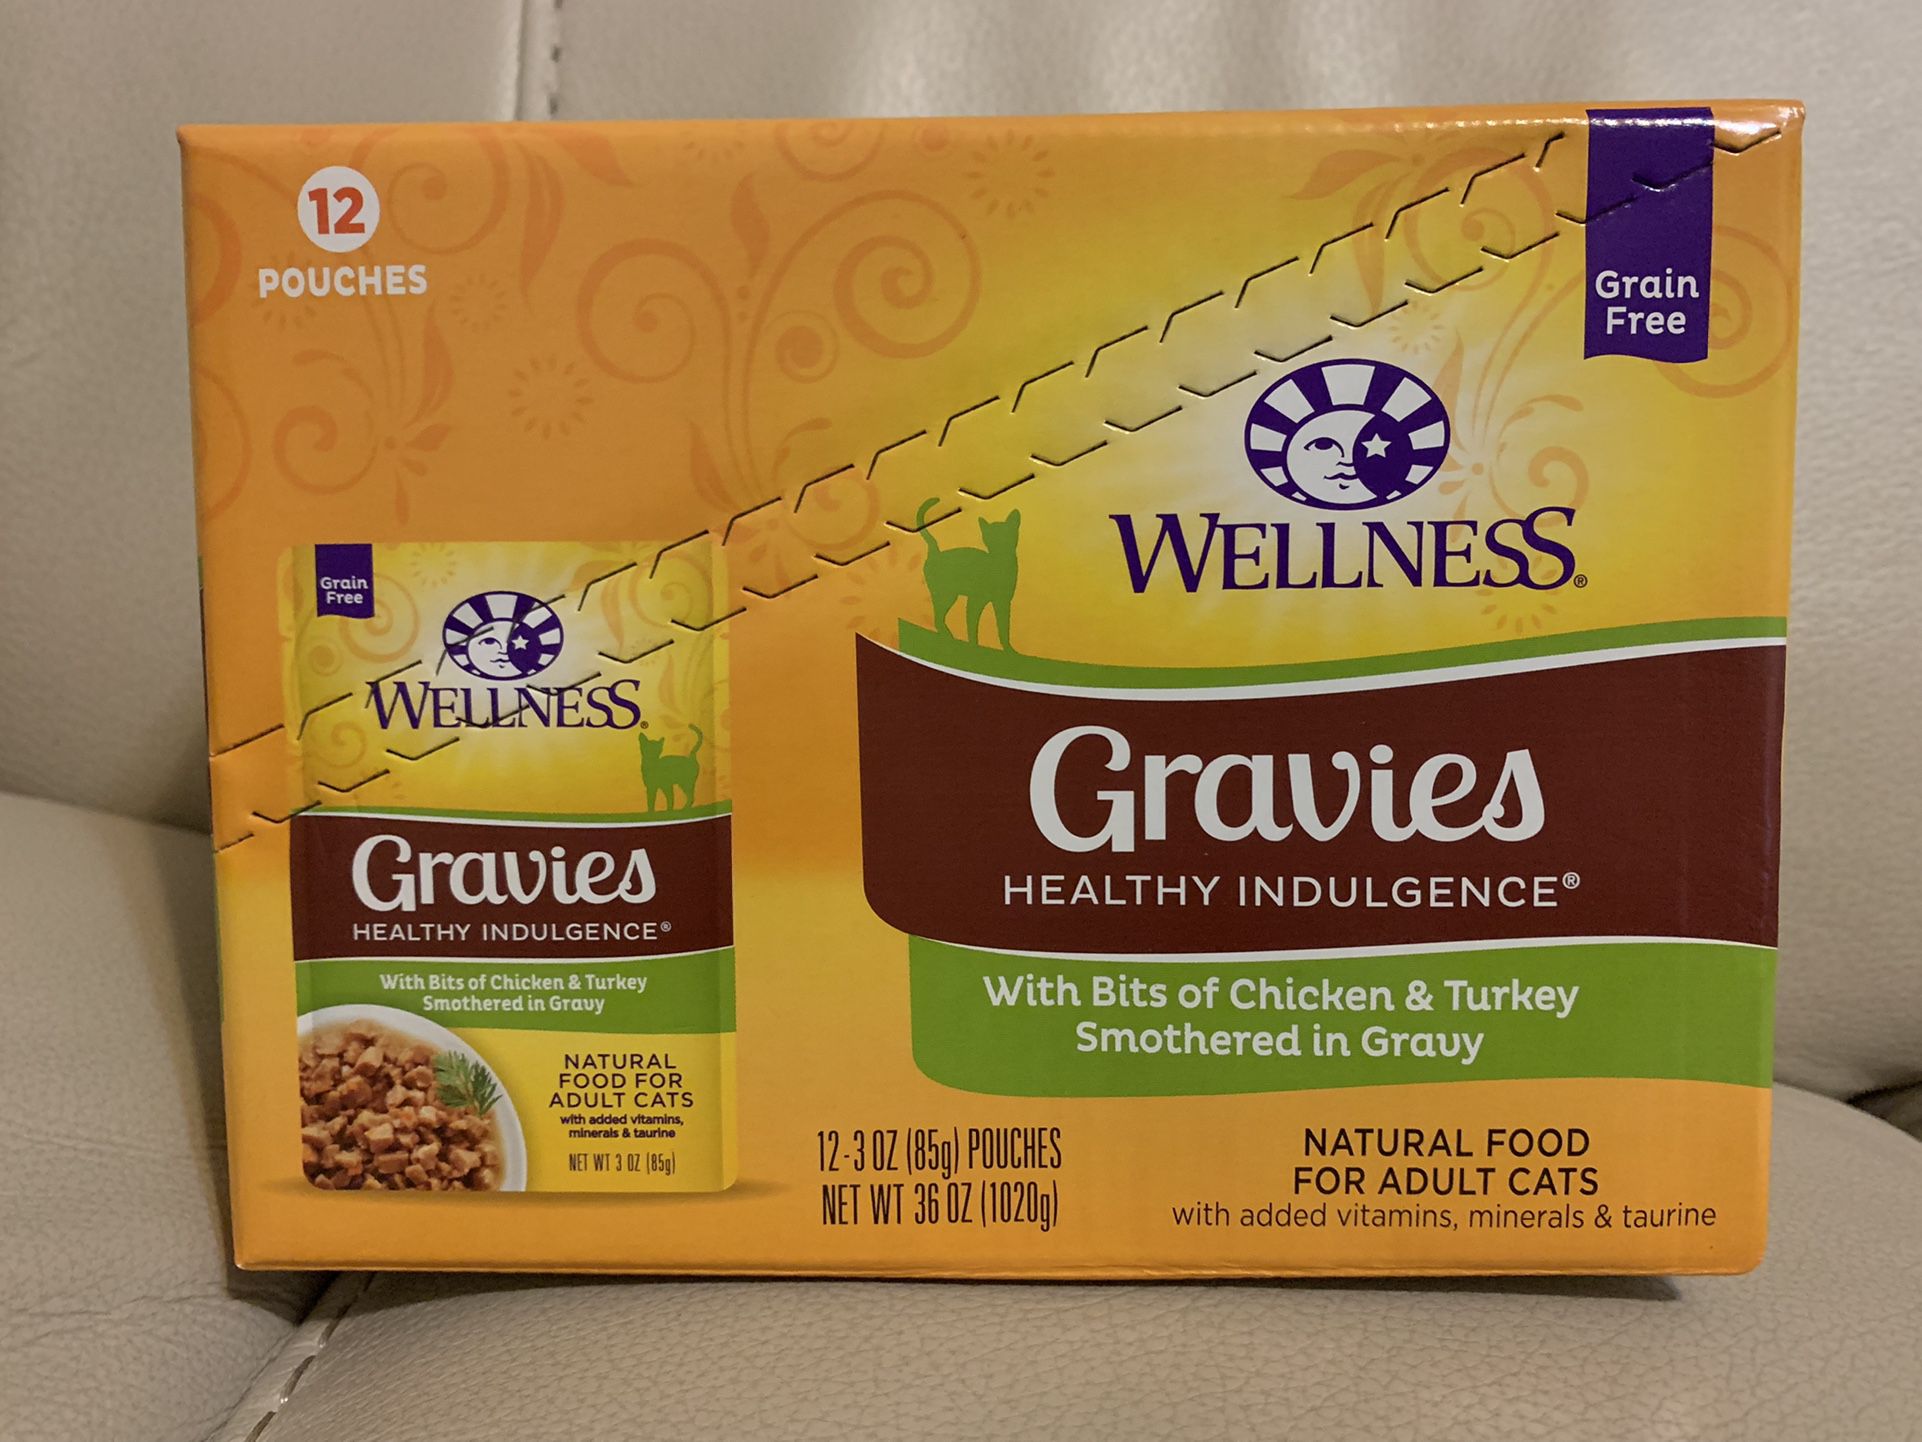 New Wellness Gravies Natural Food For Adult Cats Chicken & Turkey